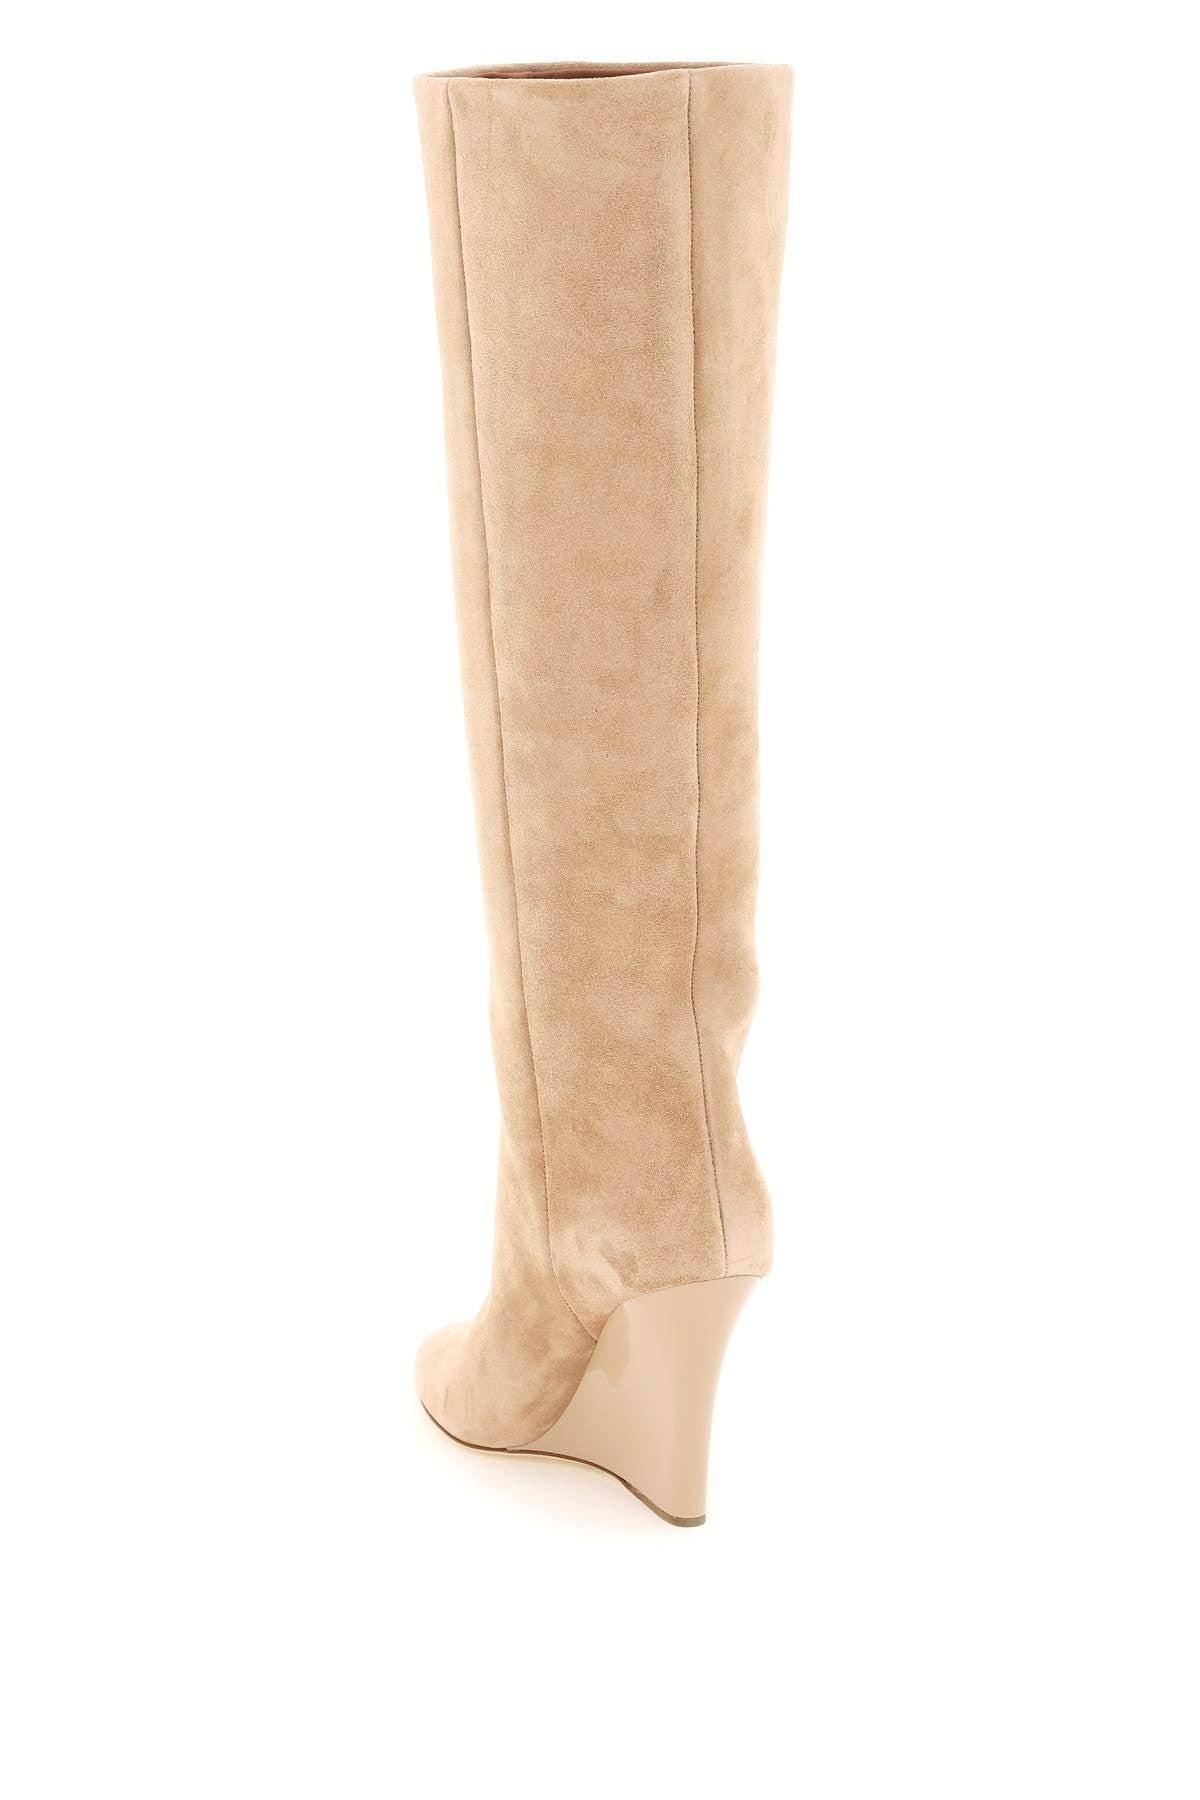 Paris Texas Suede Leather 'wanda' Boots Beige Leather in White | Lyst